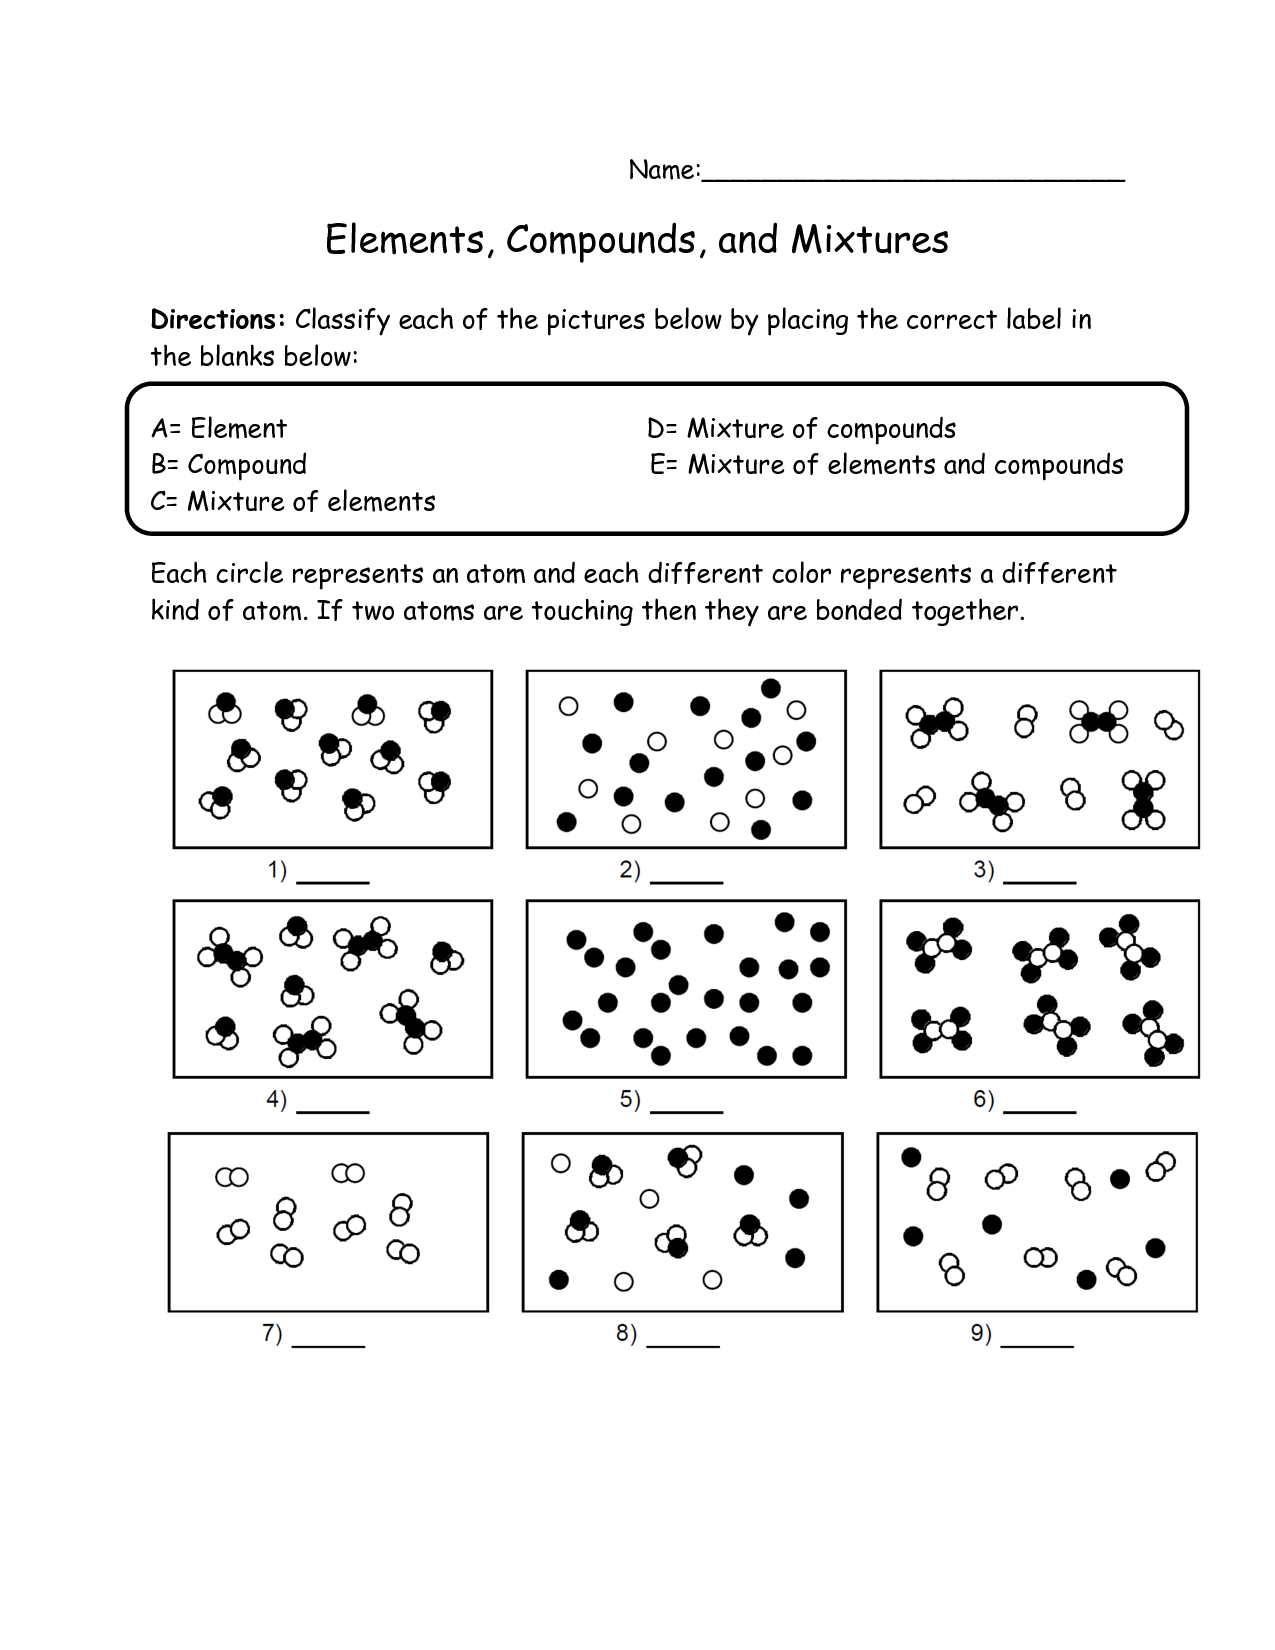 Elements Compounds and Mixtures Worksheet/ Crossword Puzzle by Throughout Elements Compounds Mixtures Worksheet Answers